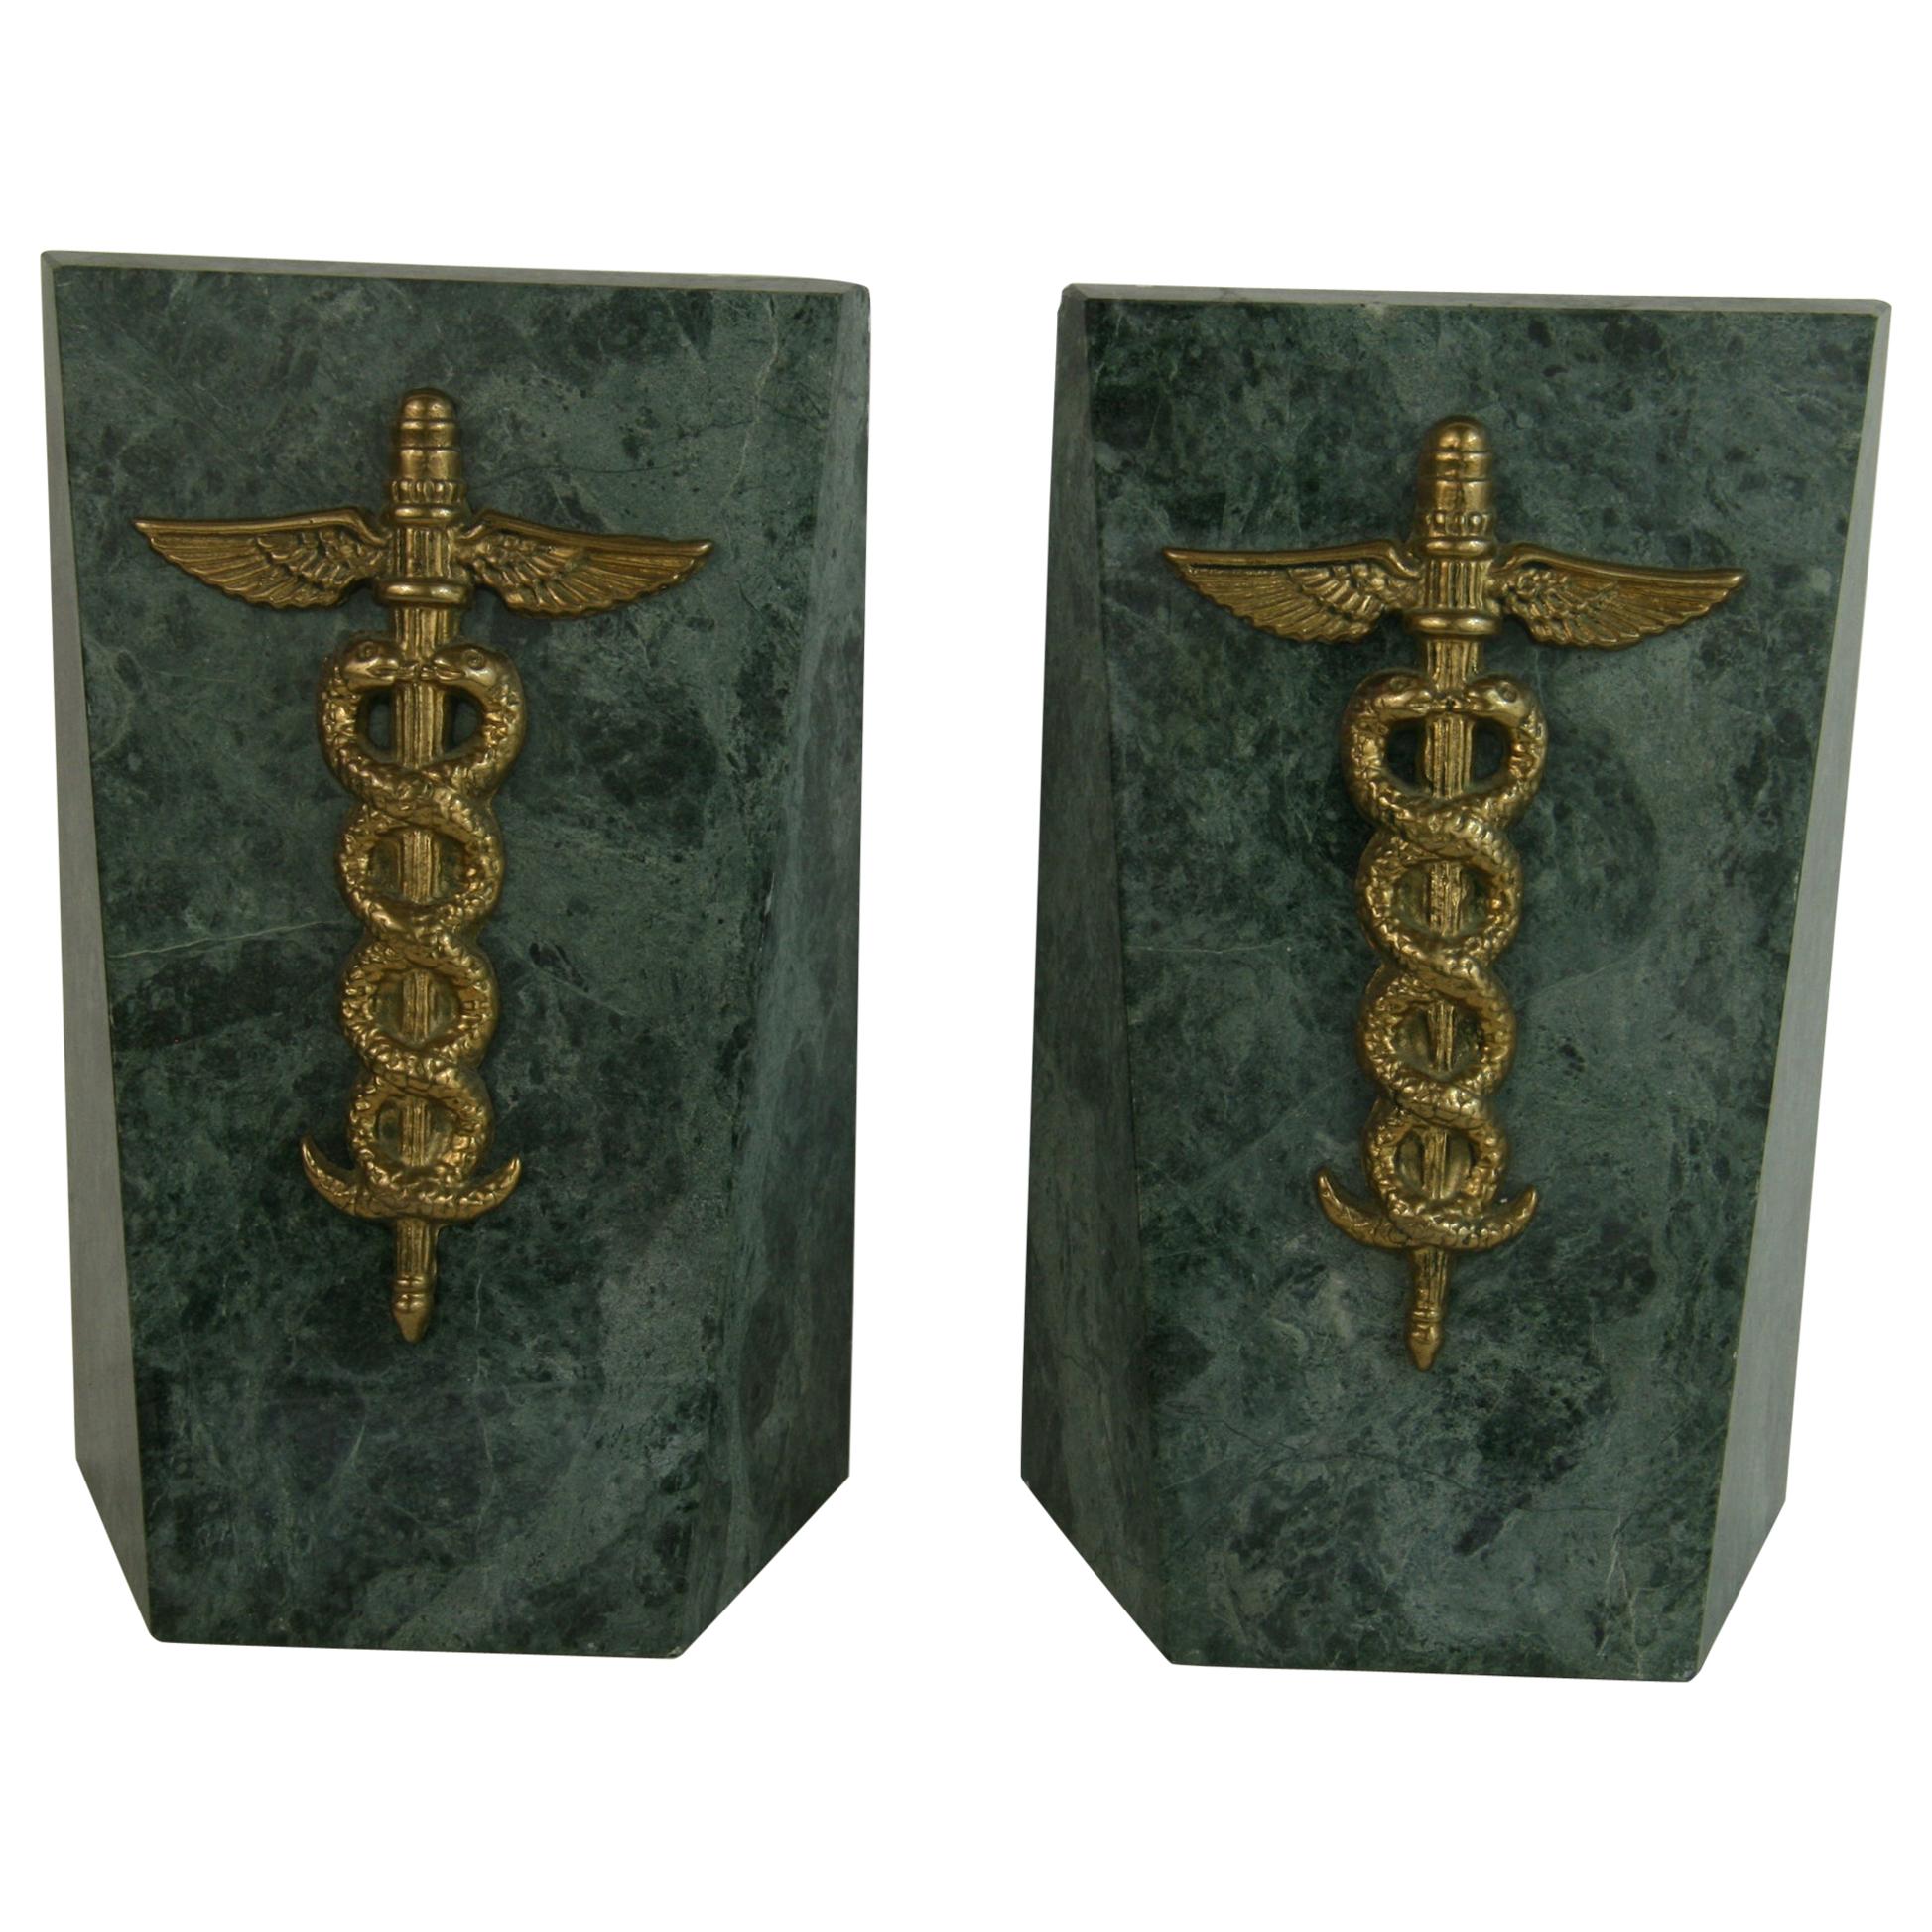 Tiger Eye Marble Medical Bookends with Gold Plated Caduceus Insignia Emblem